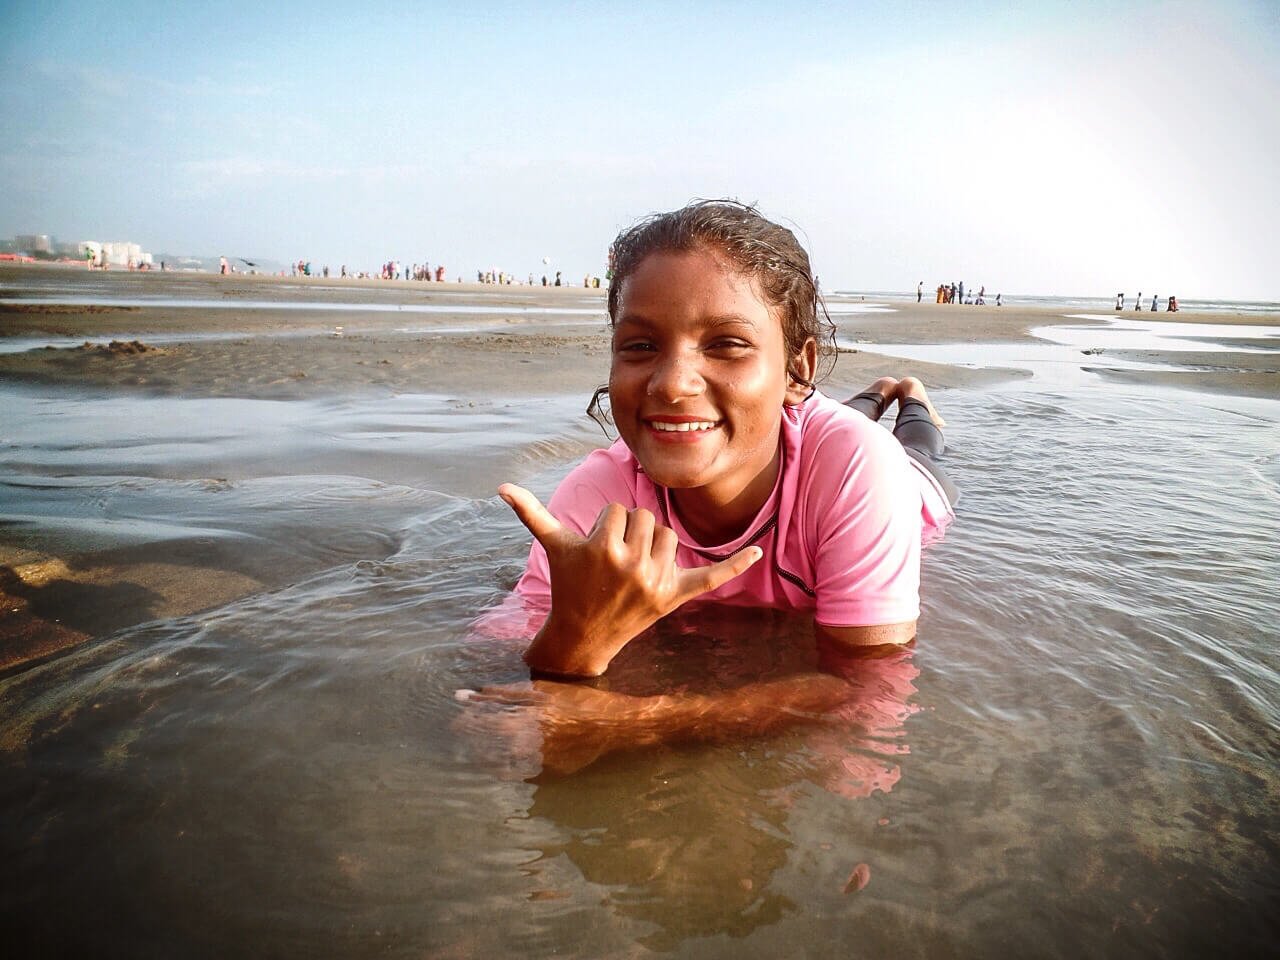 Still from Bangla Surf Girls. A young girl is lying on the seashore, she is smiling at the camera and is partly being covered by the ocean.